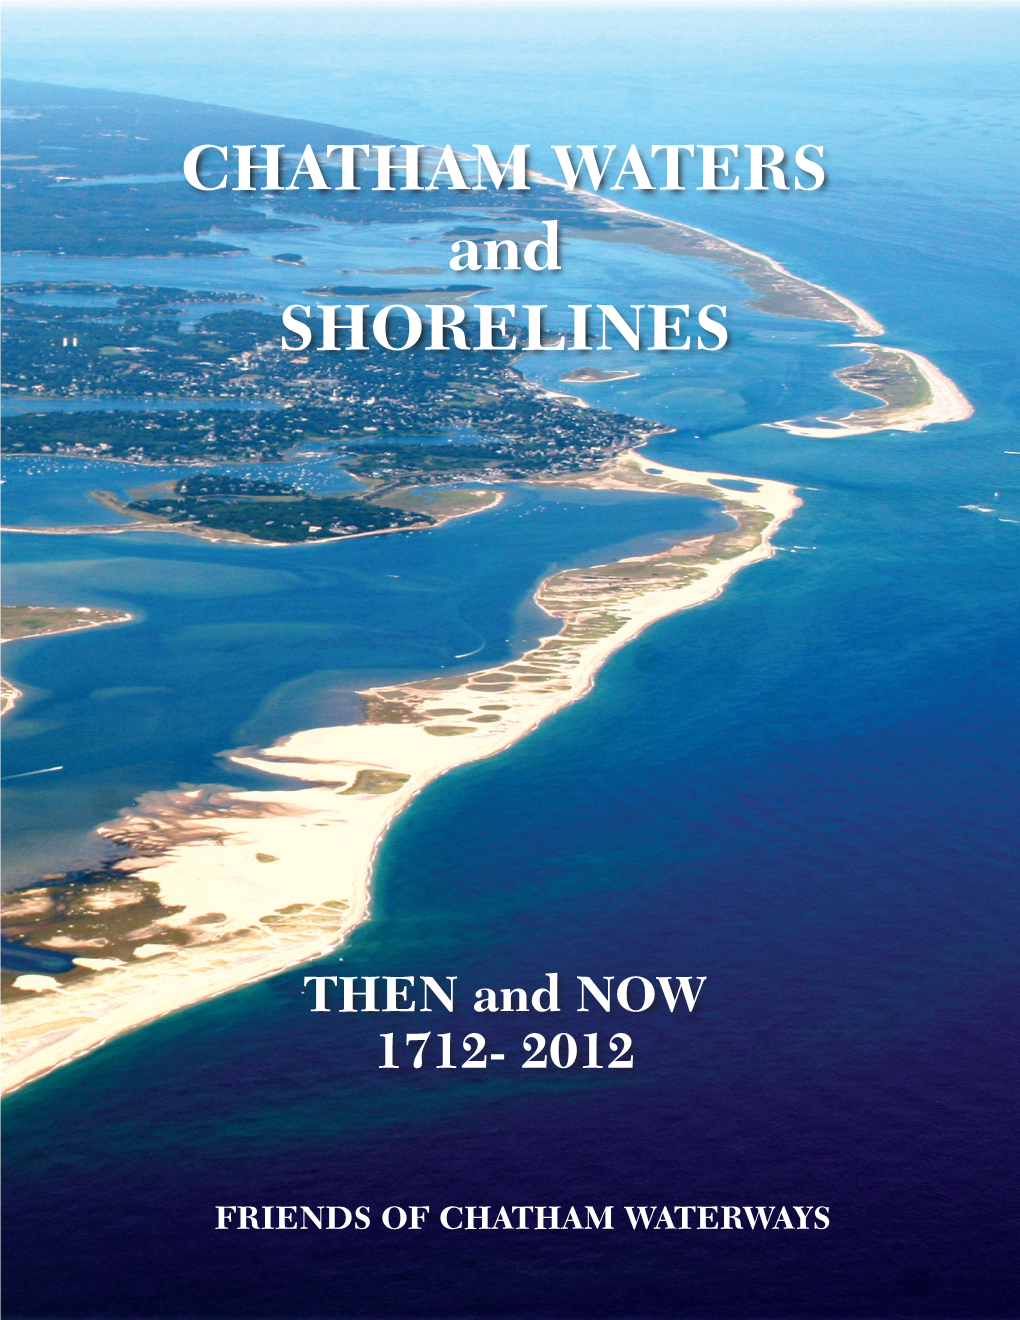 CHATHAM WATERS and SHORELINES